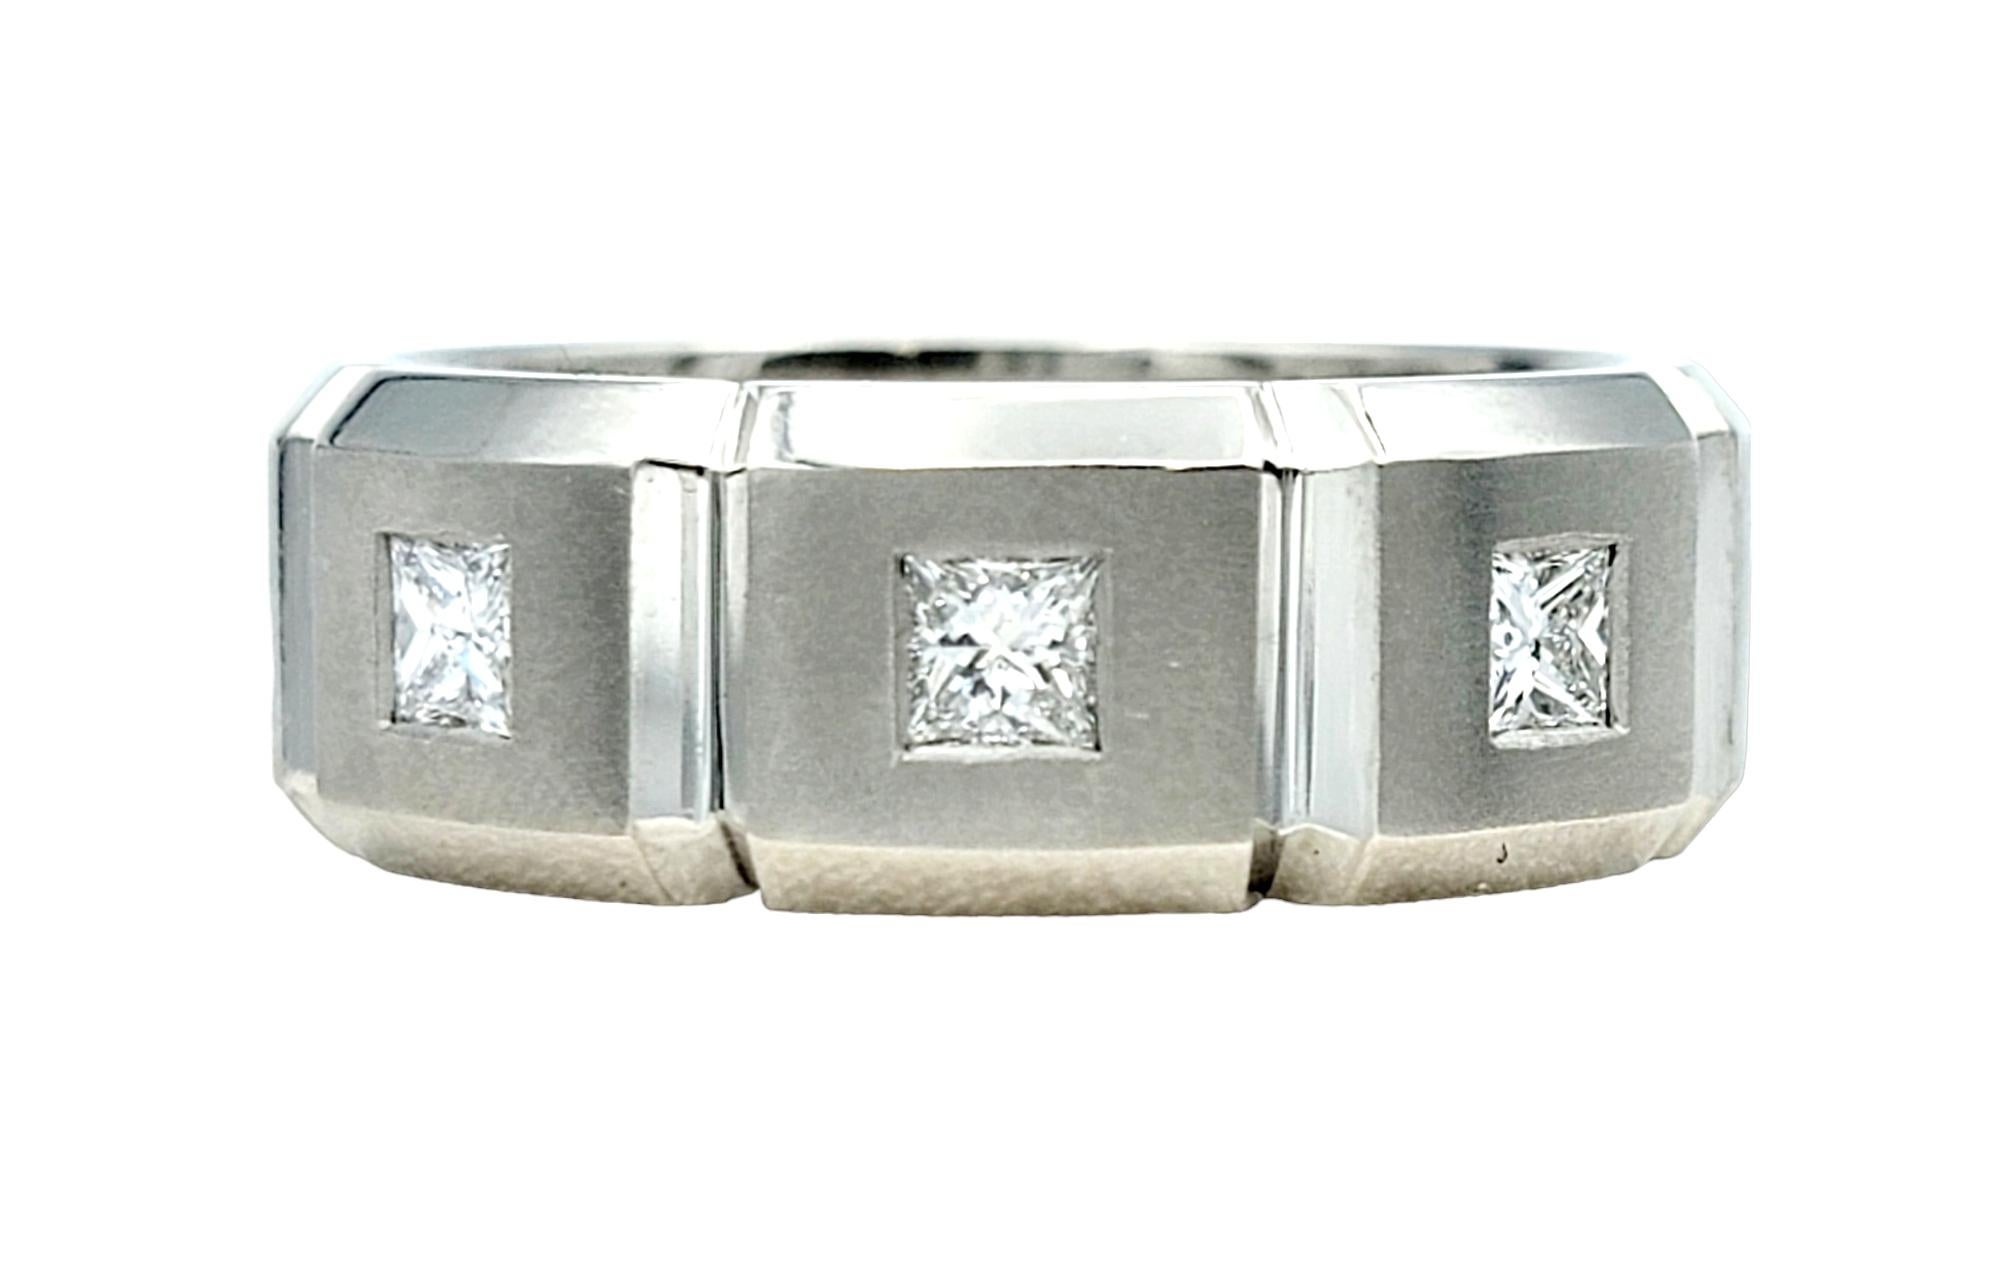 Ring Size: 13

This men's platinum band ring is a masterful blend of sophistication and versatility, making it a perfect choice for everyday wear or a distinctive wedding band. The ridged design along the band adds a touch of modernity and visual